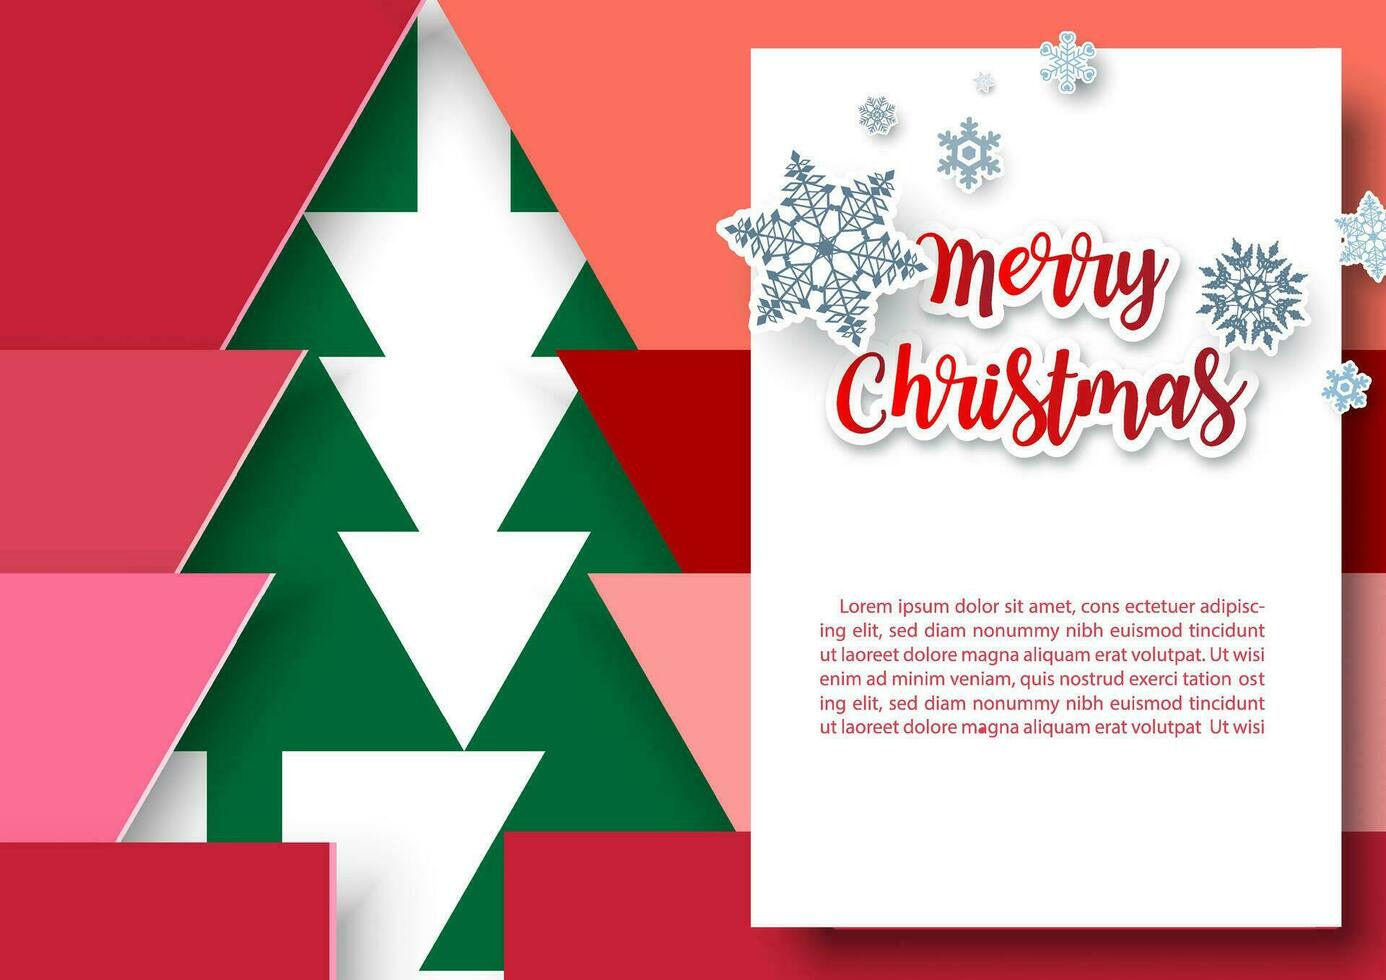 Christmas greeting card in paper cut style and vector design with example texts.